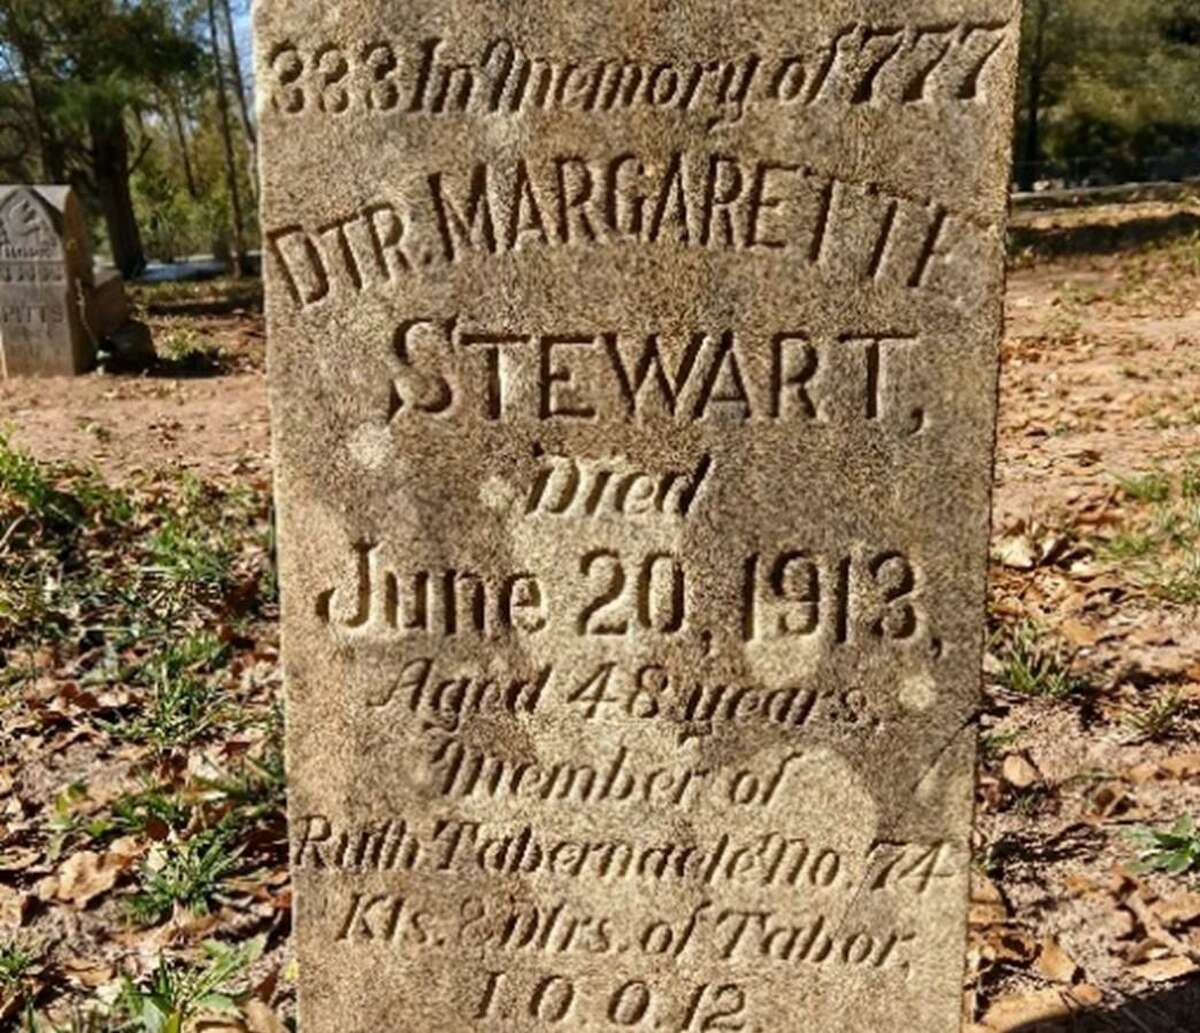 Margarette Stewart, buried in the Conroe Community Cemetery on 10th Street was a member of the Daughters of Tabor.